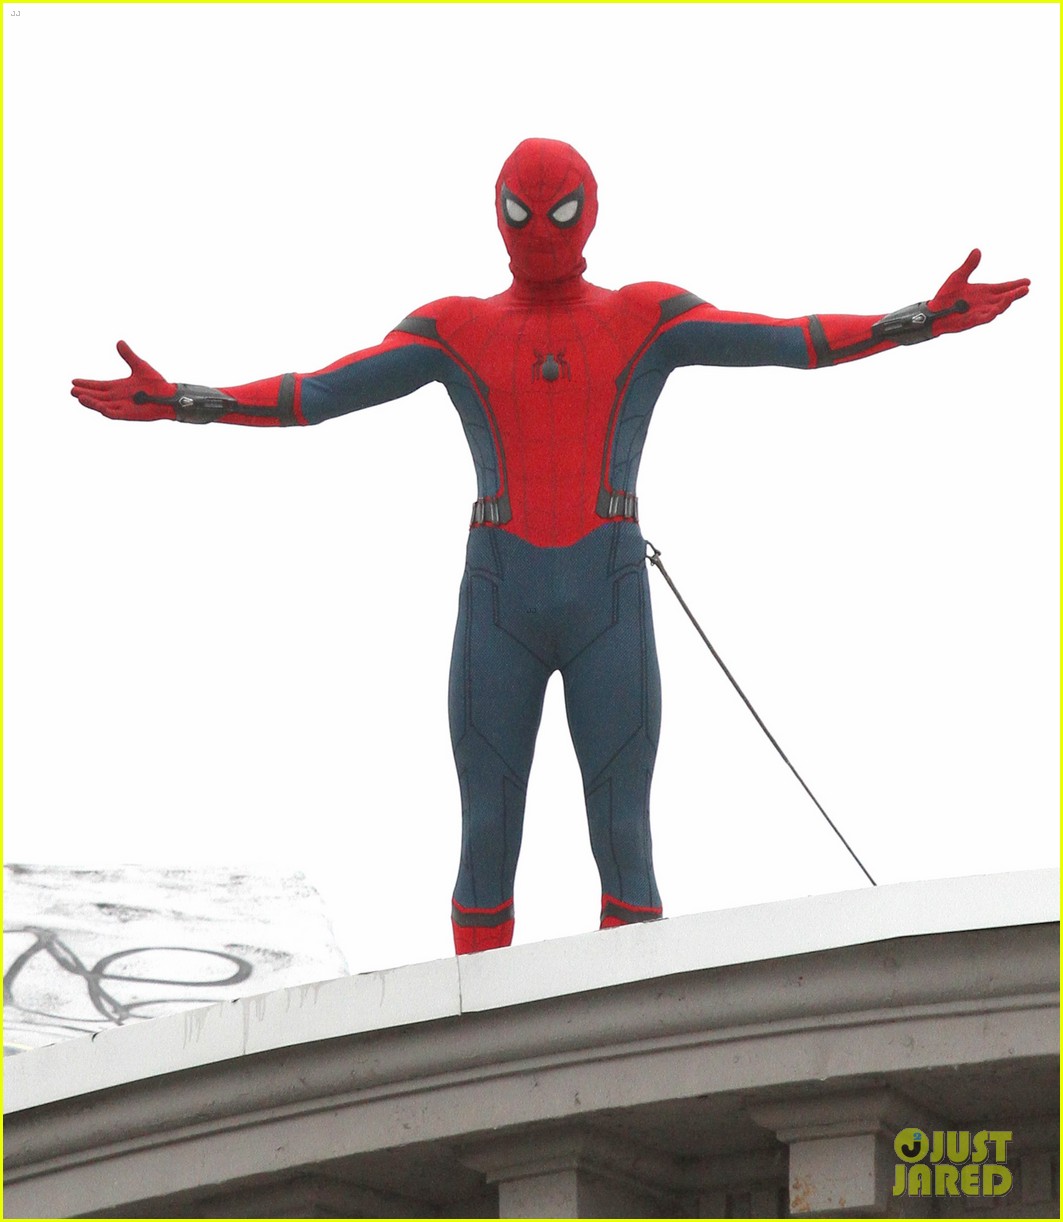 tom holland snaps a selfie while filming spide man homecoming 04